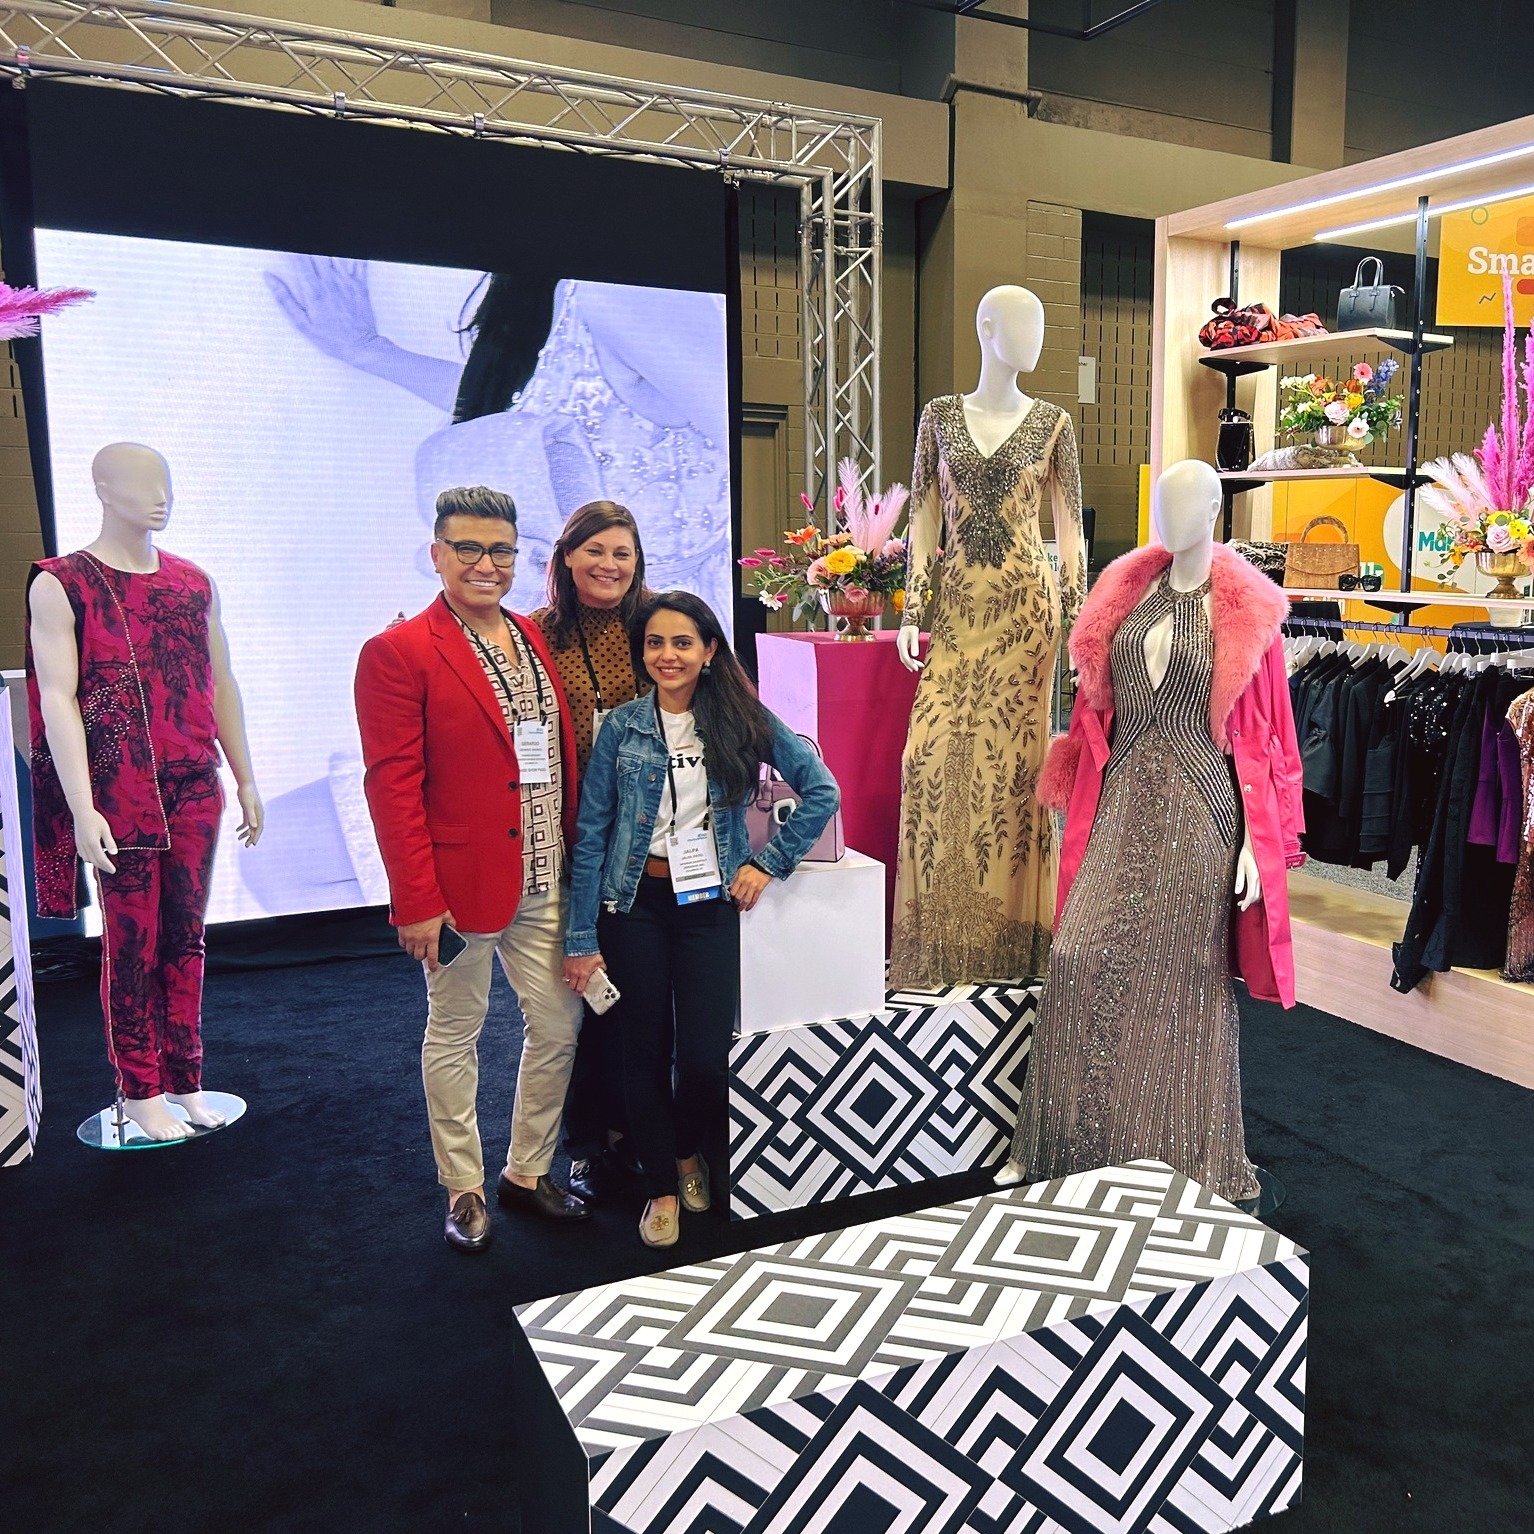 Shop! Marketplace 2024 is kicking off in Cincinnati, Ohio and we are feeling proud and a bit nostalgic. As we look back, we remember Jalpa Patel and her team who brought their winning design concept to life at last year's event. They worked tirelessl